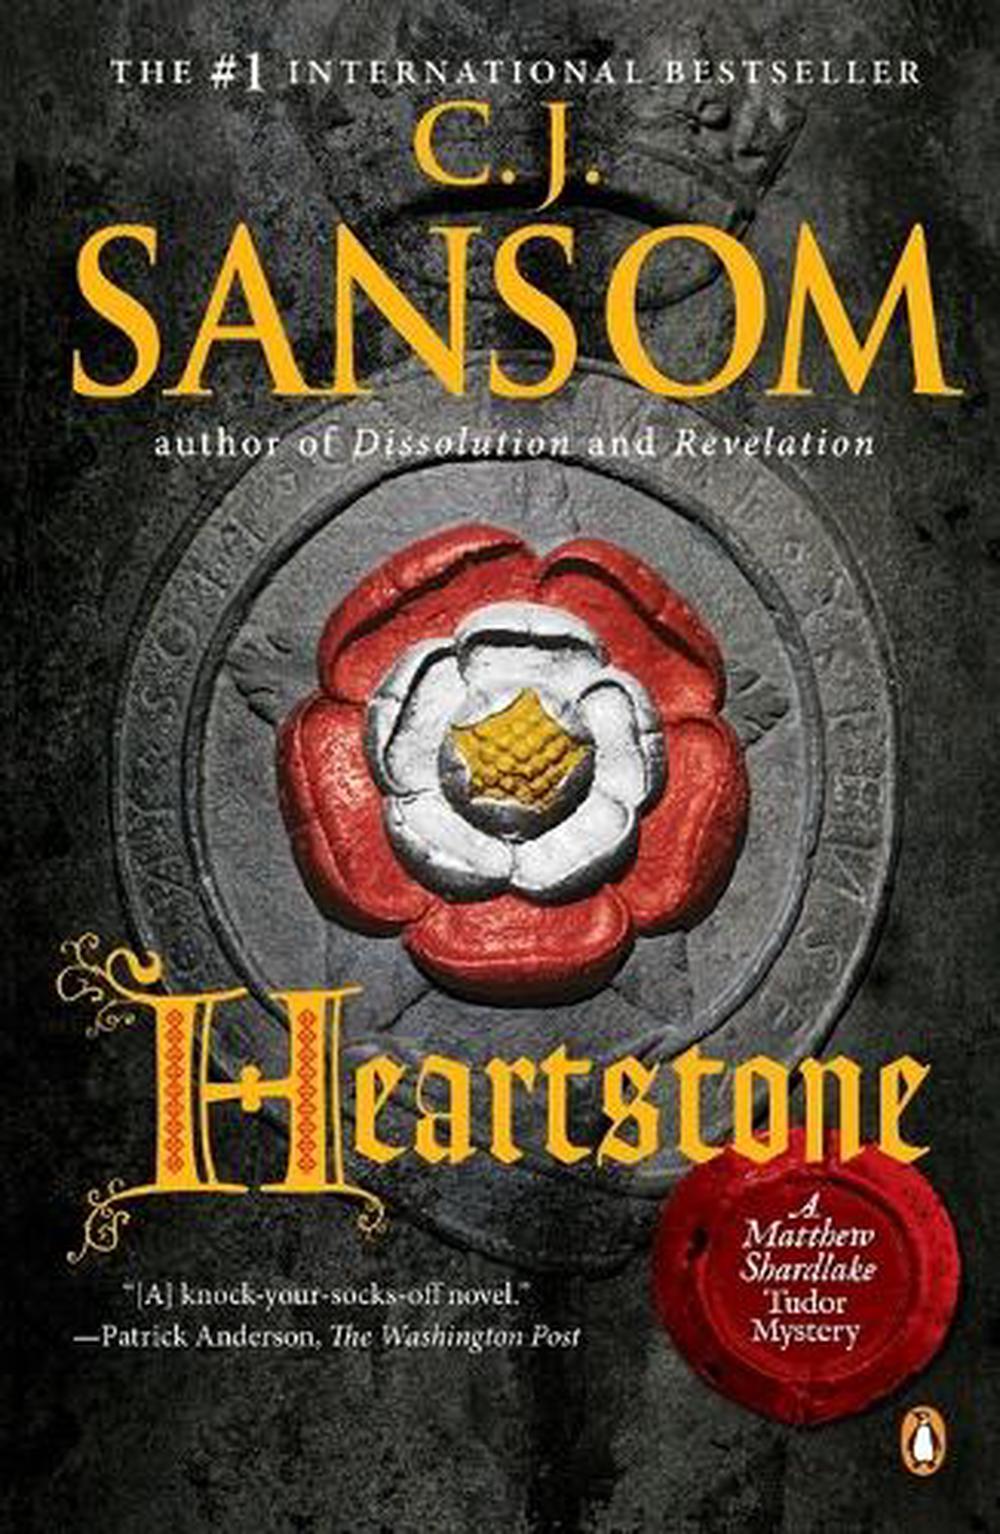 Heartstone by C.J. Sansom (English) Paperback Book Free Shipping